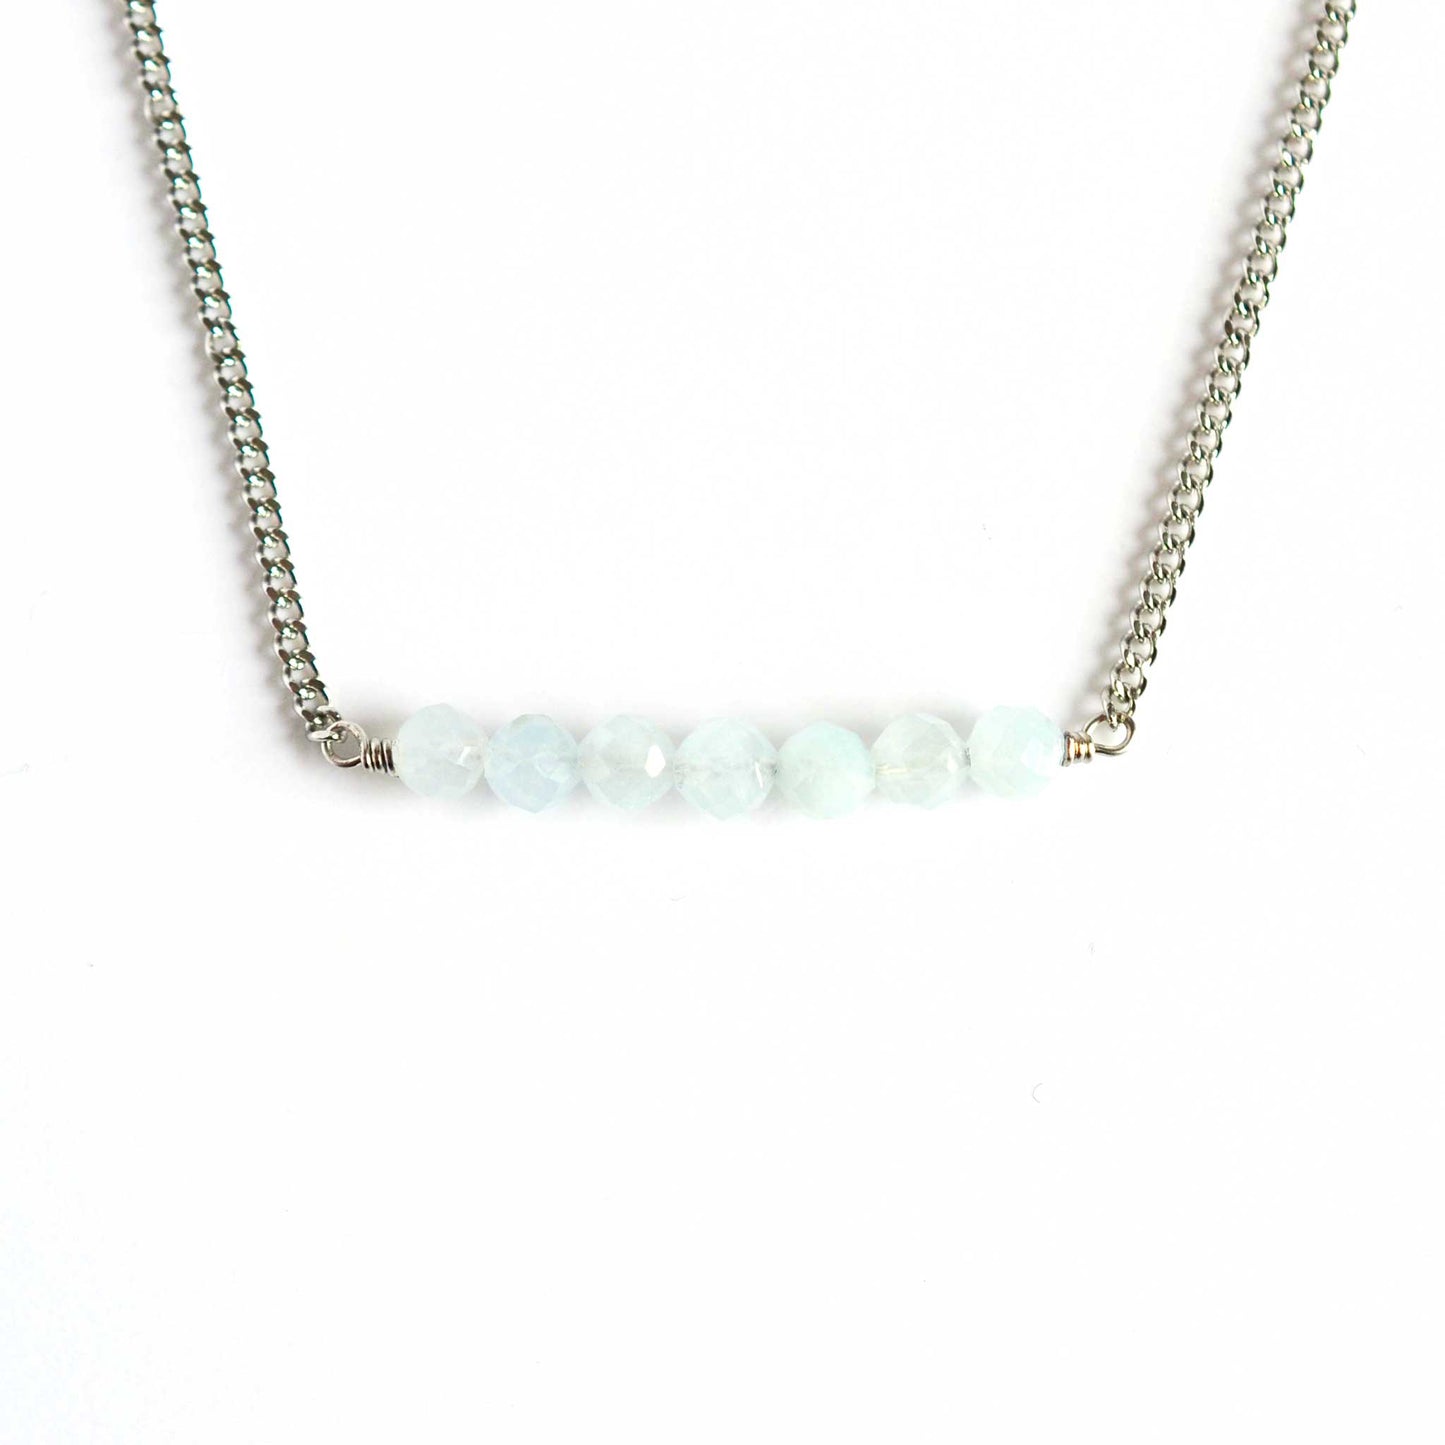 Dainty pale blue Aquamarine necklace on stainless steel chain